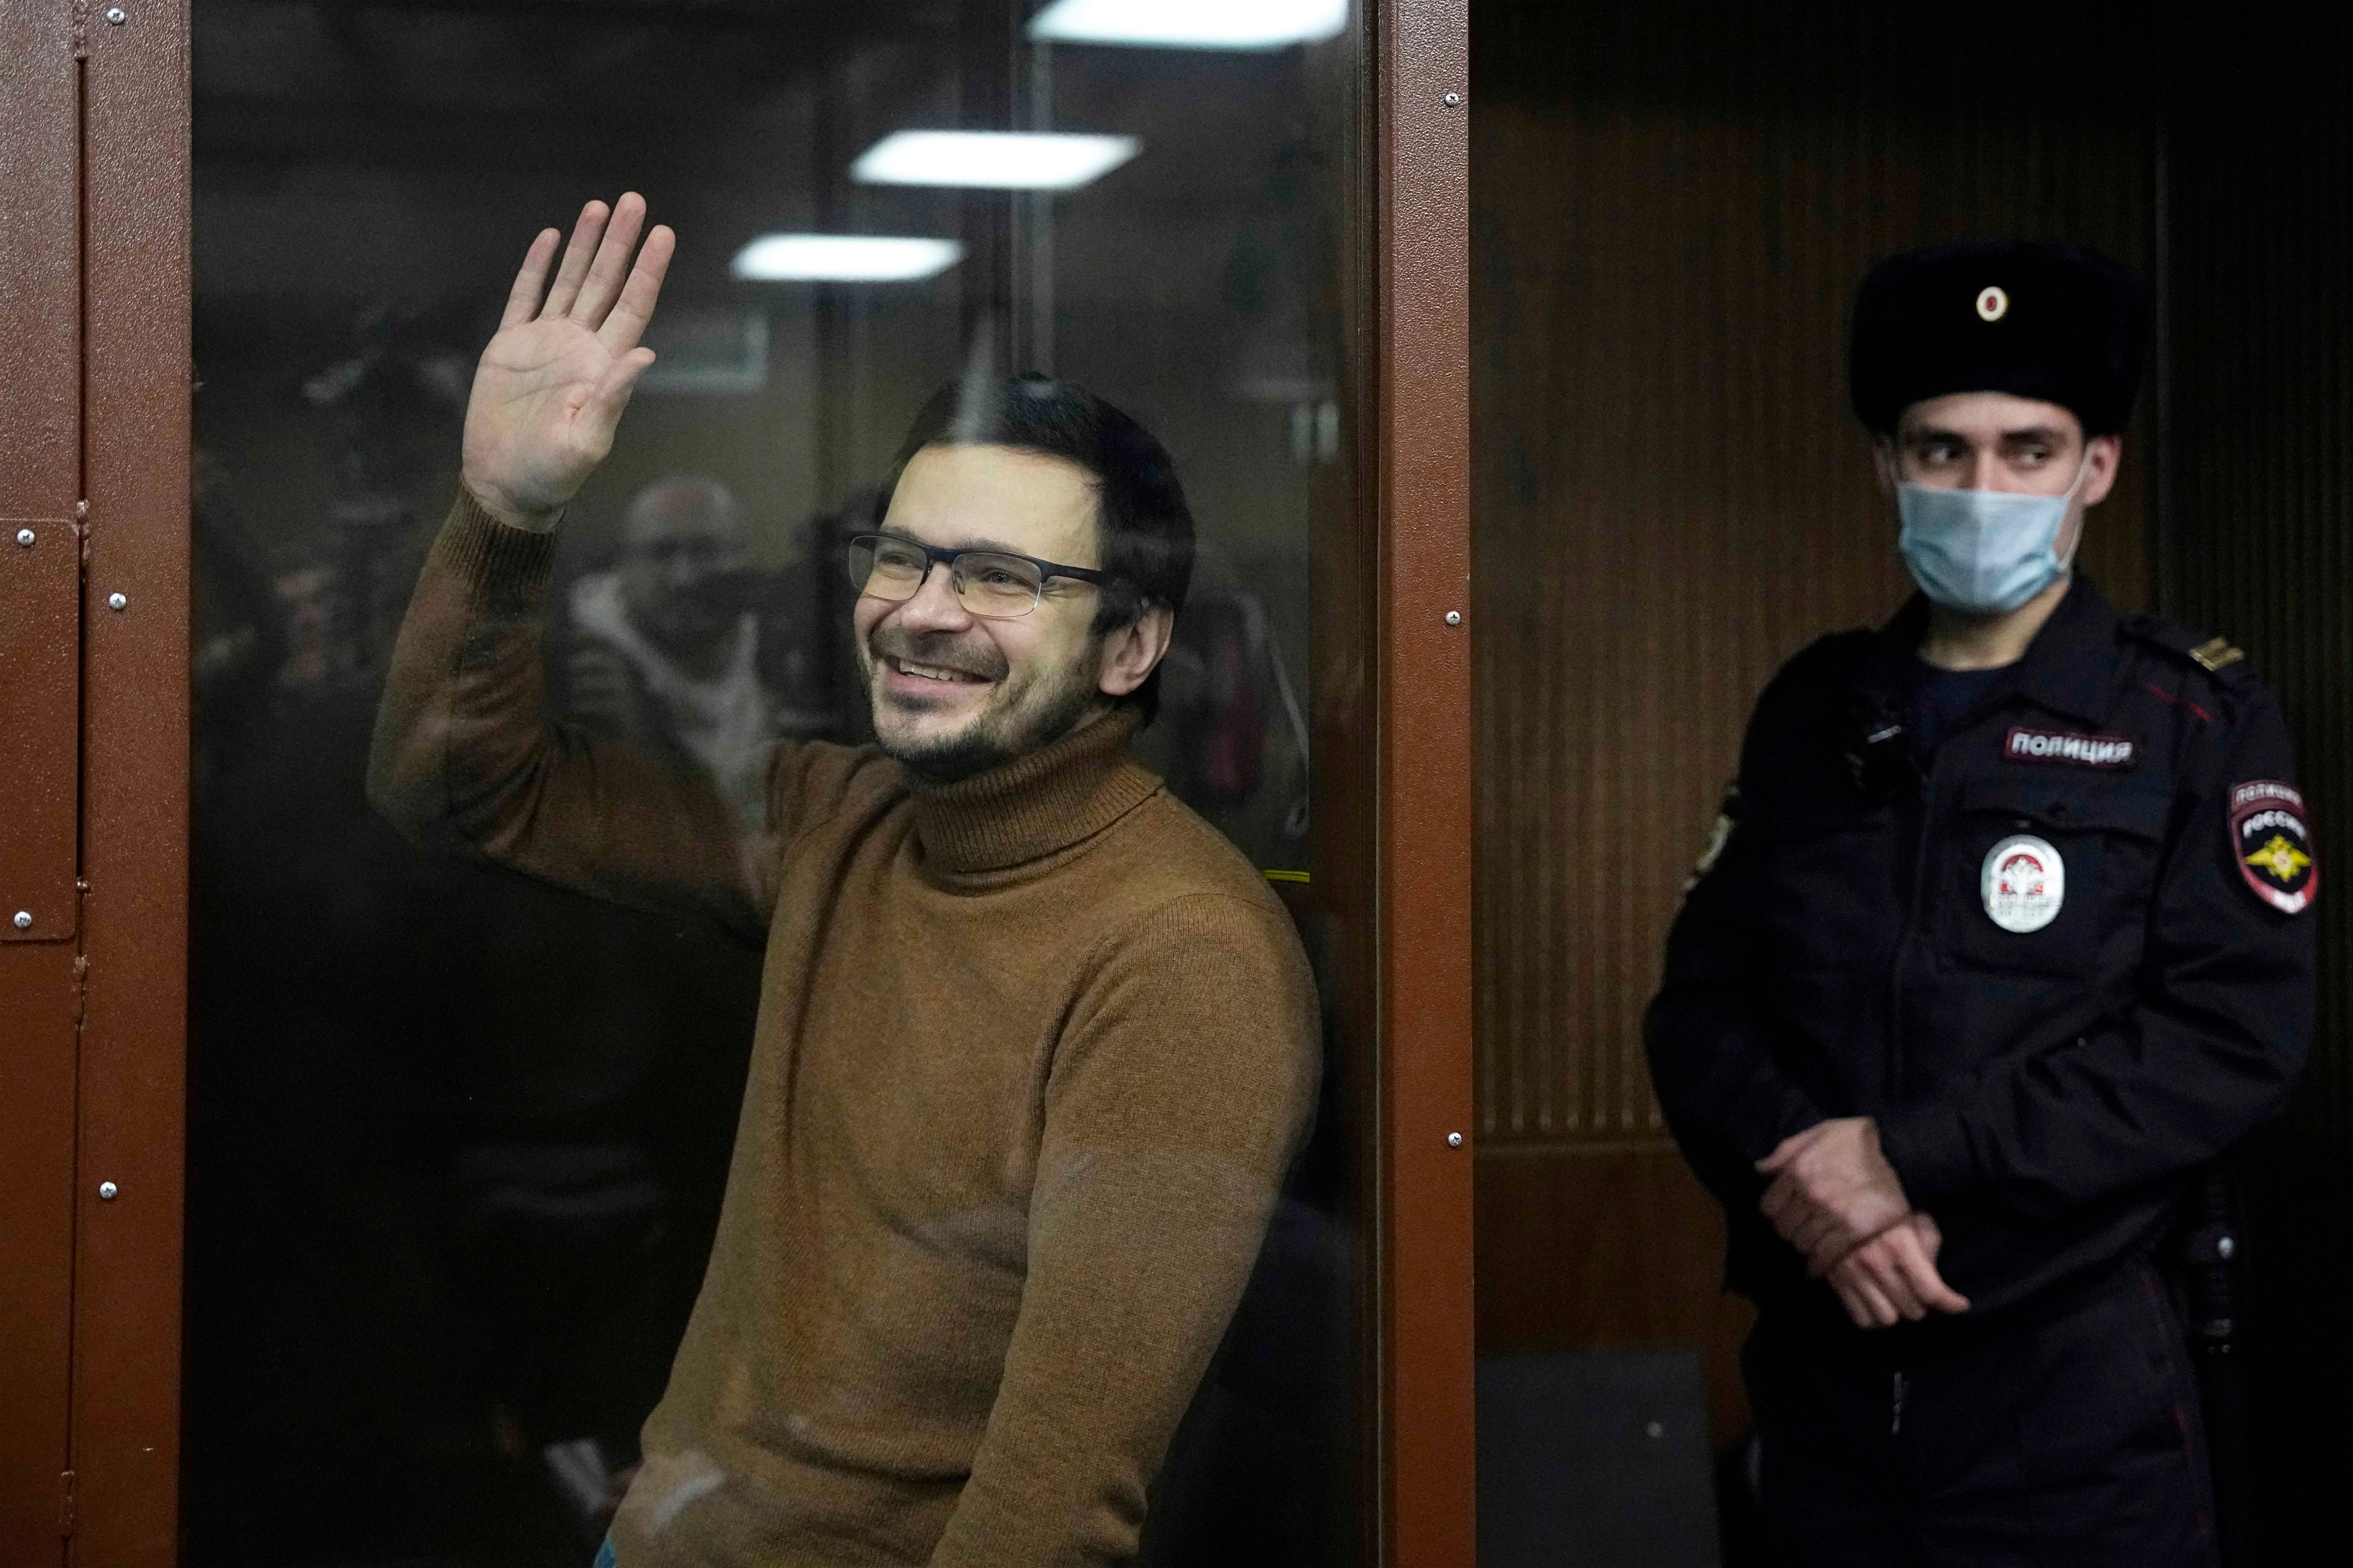 Ilya Yashin waves to supporters in a Moscow courtroom during a hearing on abusive charges against him of spreading "false information" about Russian forces. Moscow, Russia, November 29, 2022. 